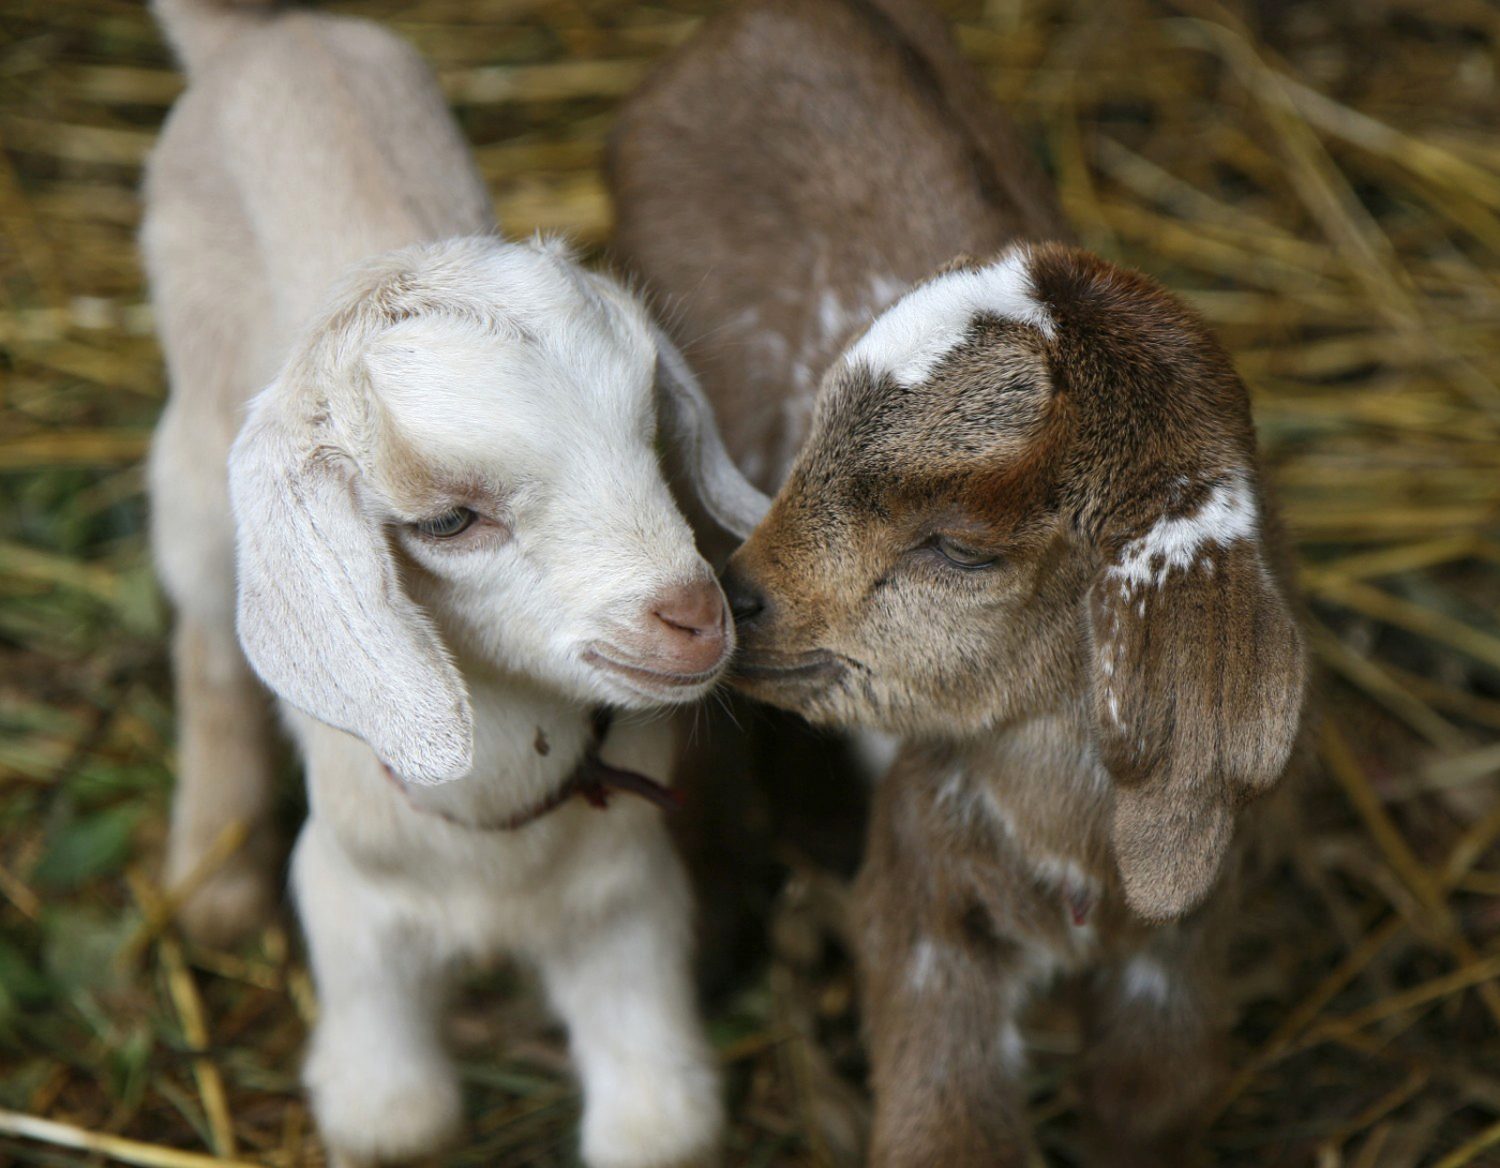 Baby goats playing together in hay at Connemara Farms Goat Dairy, one of the best things to do at Carl Sandburg House.